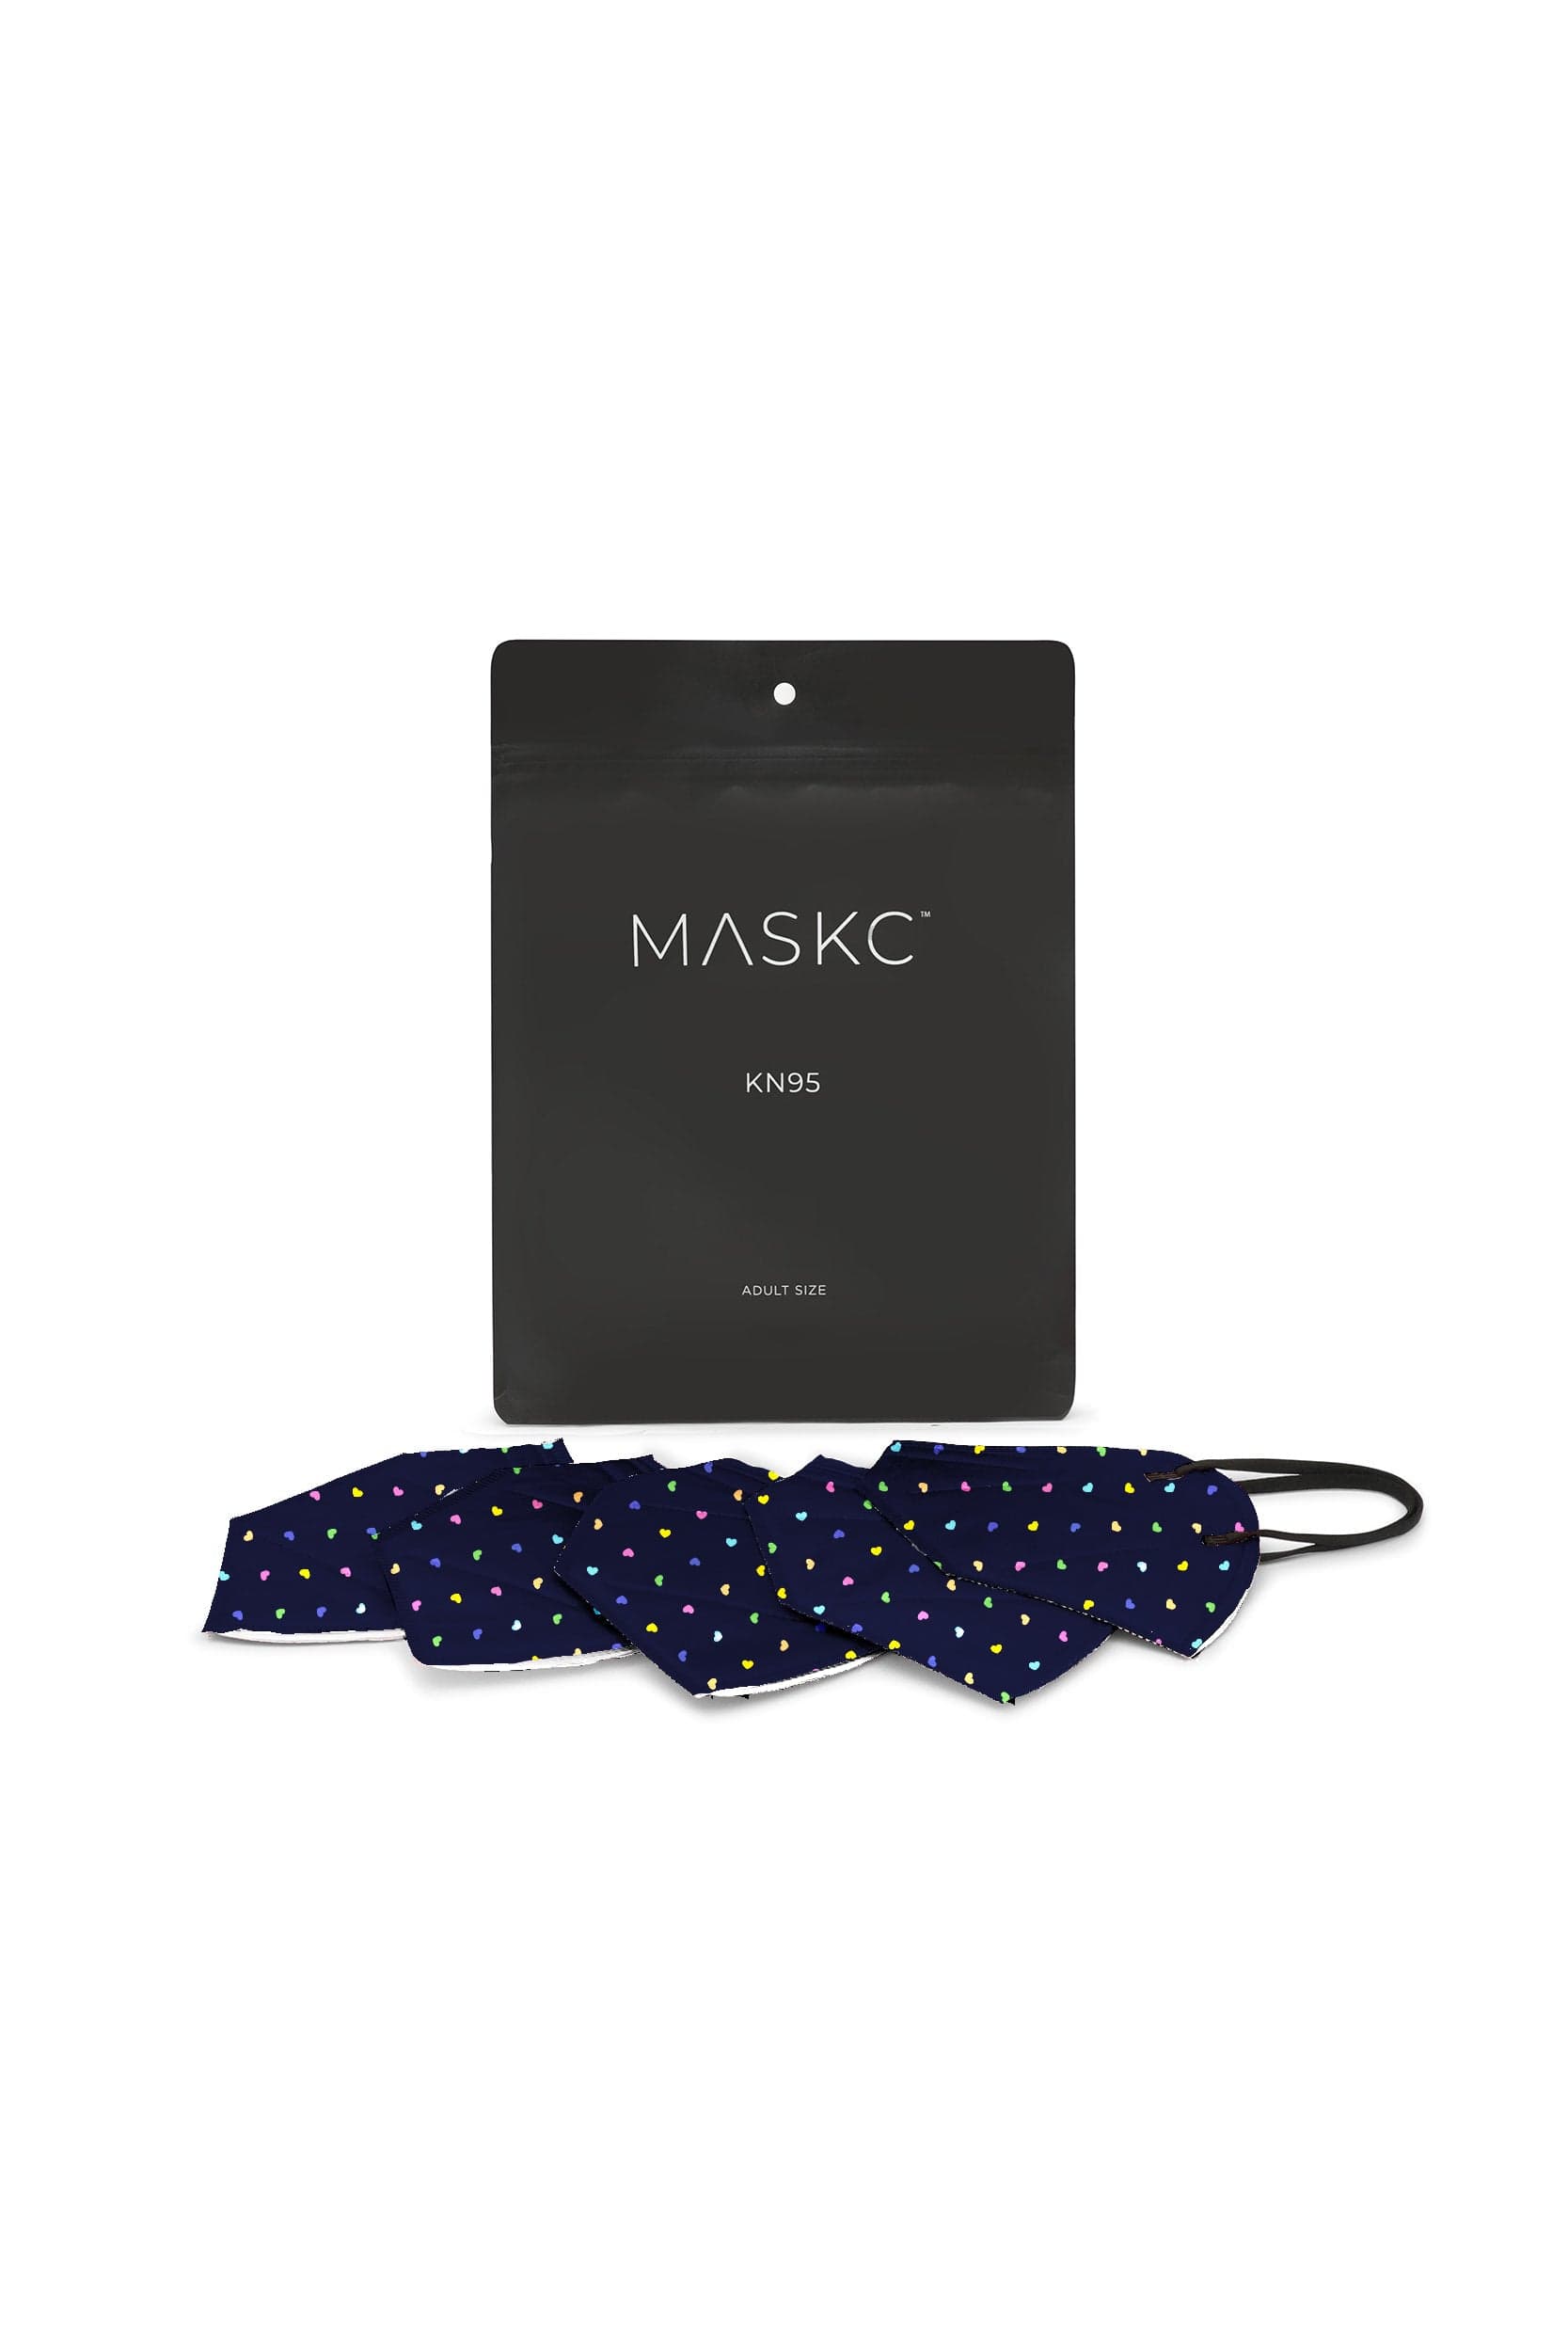 Pack of Dark Blue KN95 face masks with colorful printed hearts. Each pack contains stylish high quality face masks. 